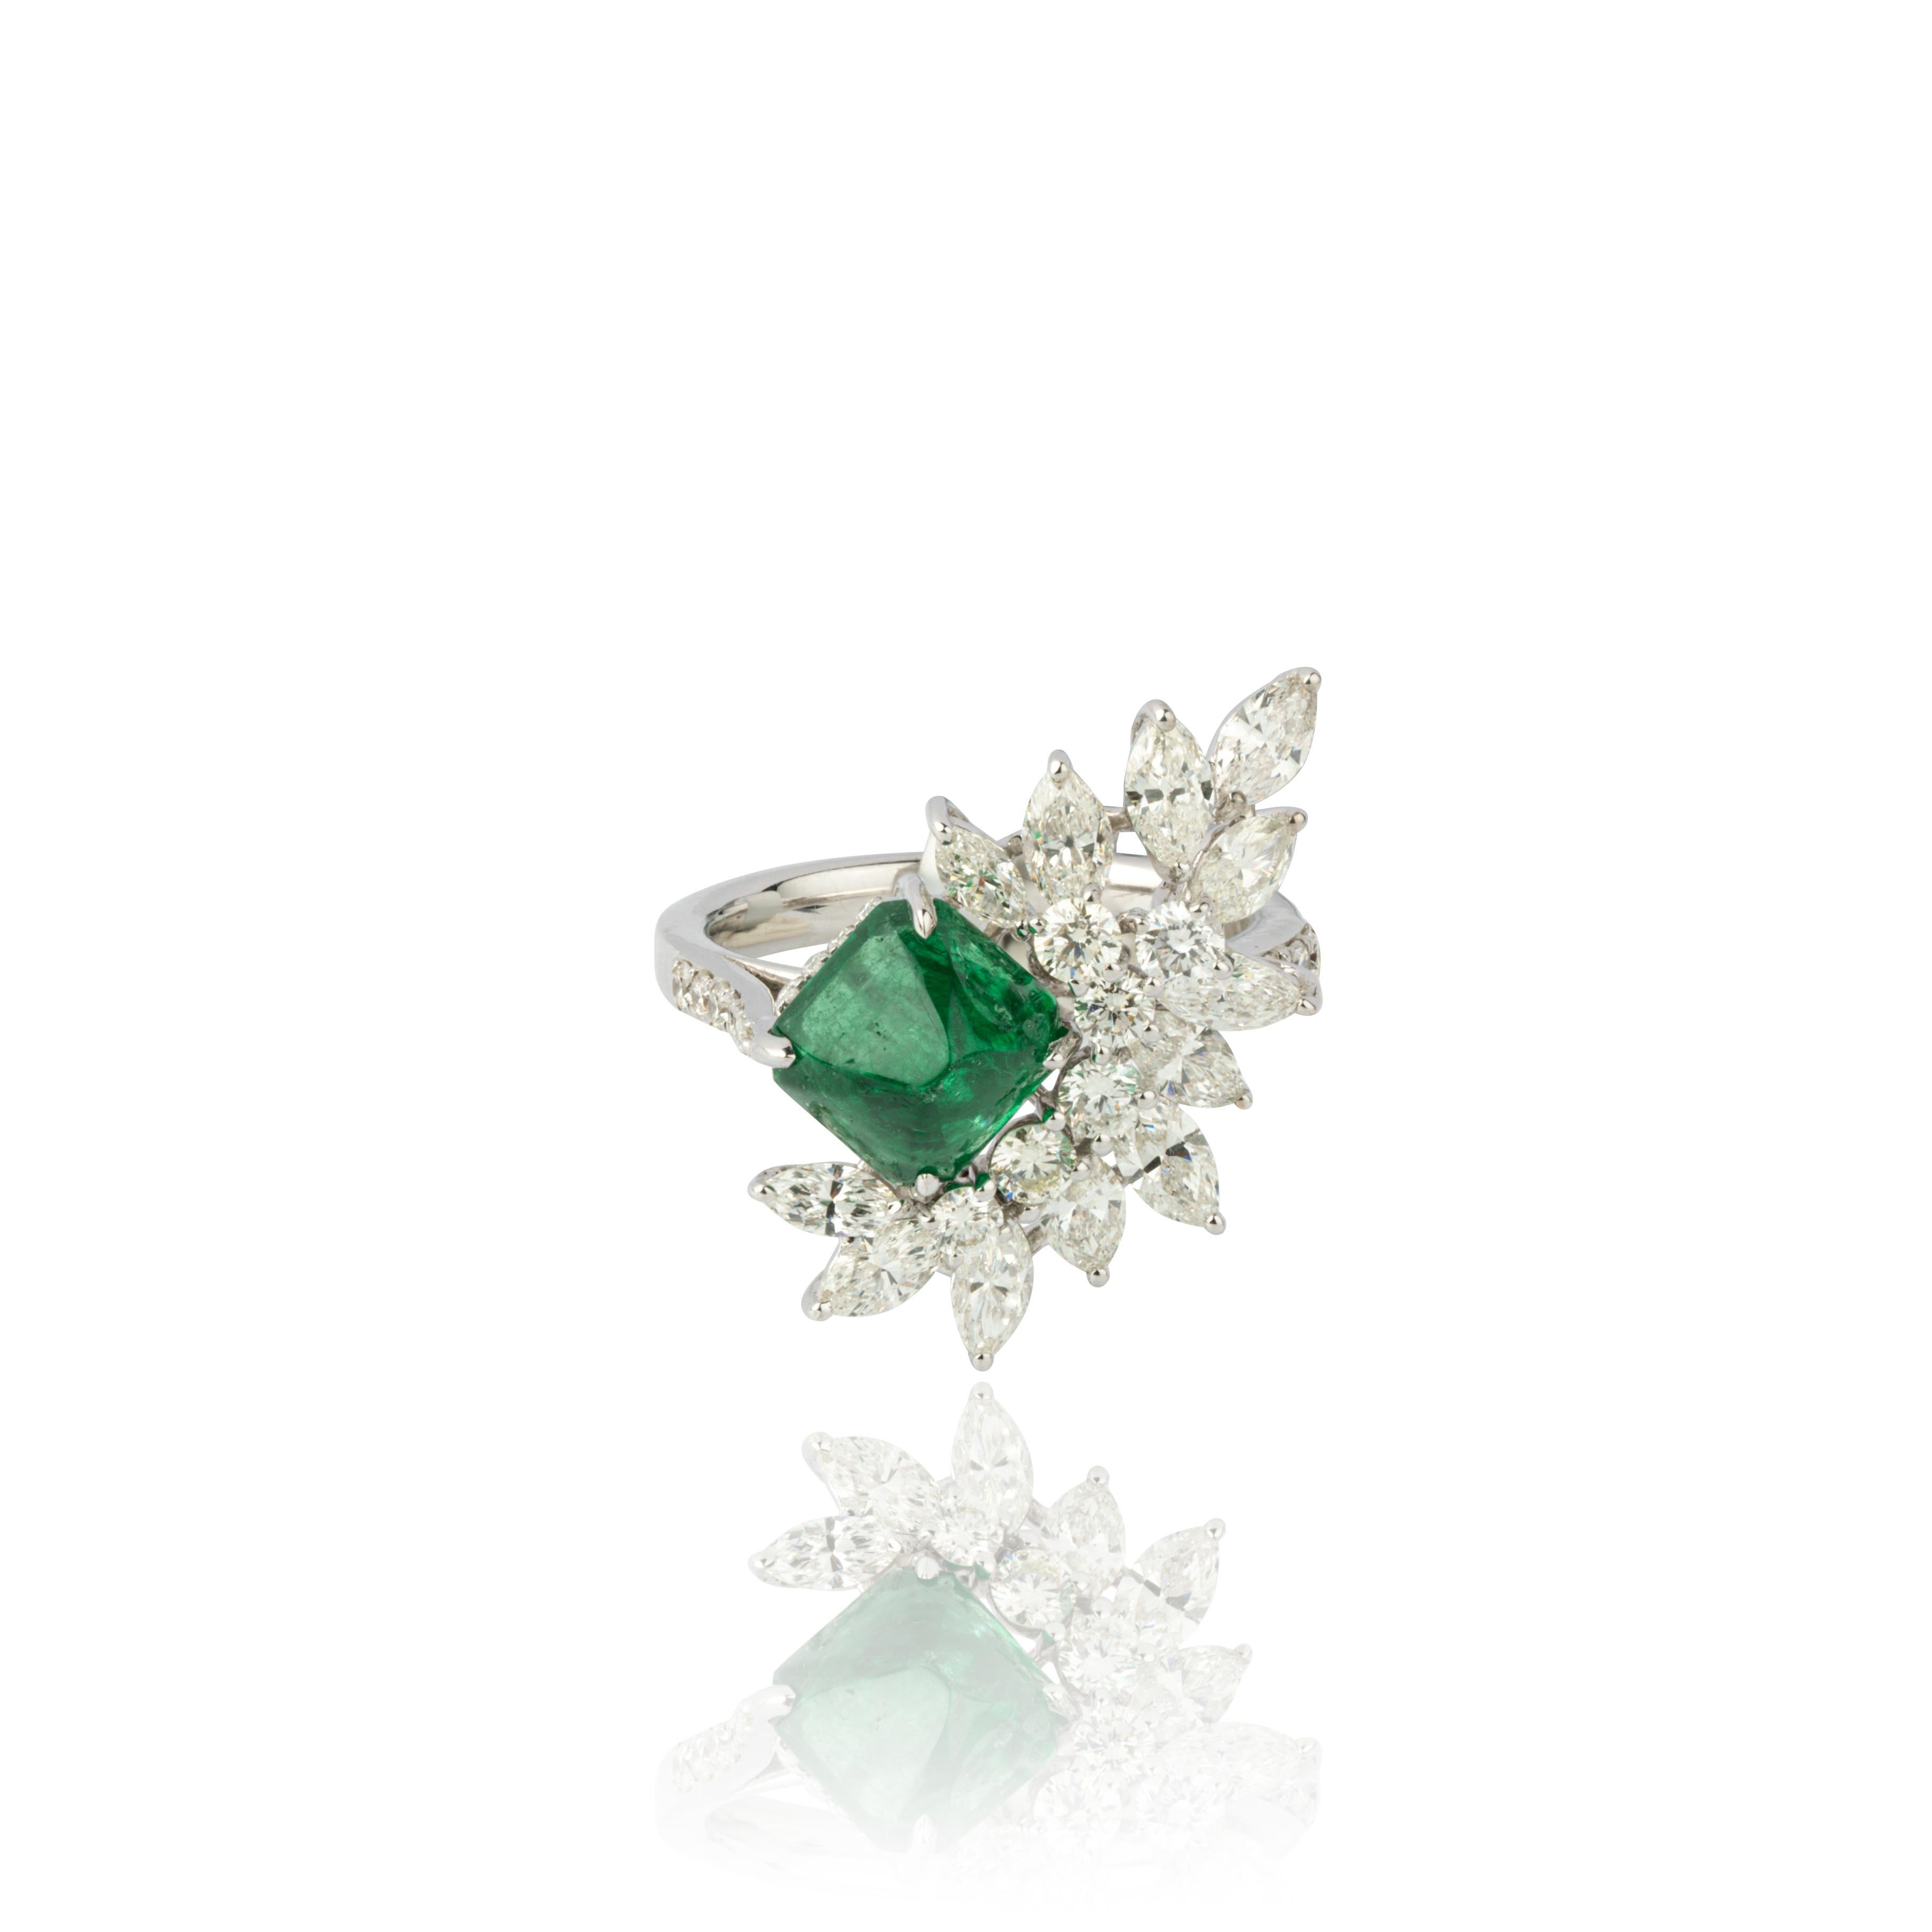 Introducing our exquisite 18 Karat White Gold Ring featuring a stunning 2.34 carat natural Zambian Emerald and 2.15 carats of diamonds. This ring is truly remarkable, showcasing the beauty of the emerald and the brilliance of the diamonds.

Crafted